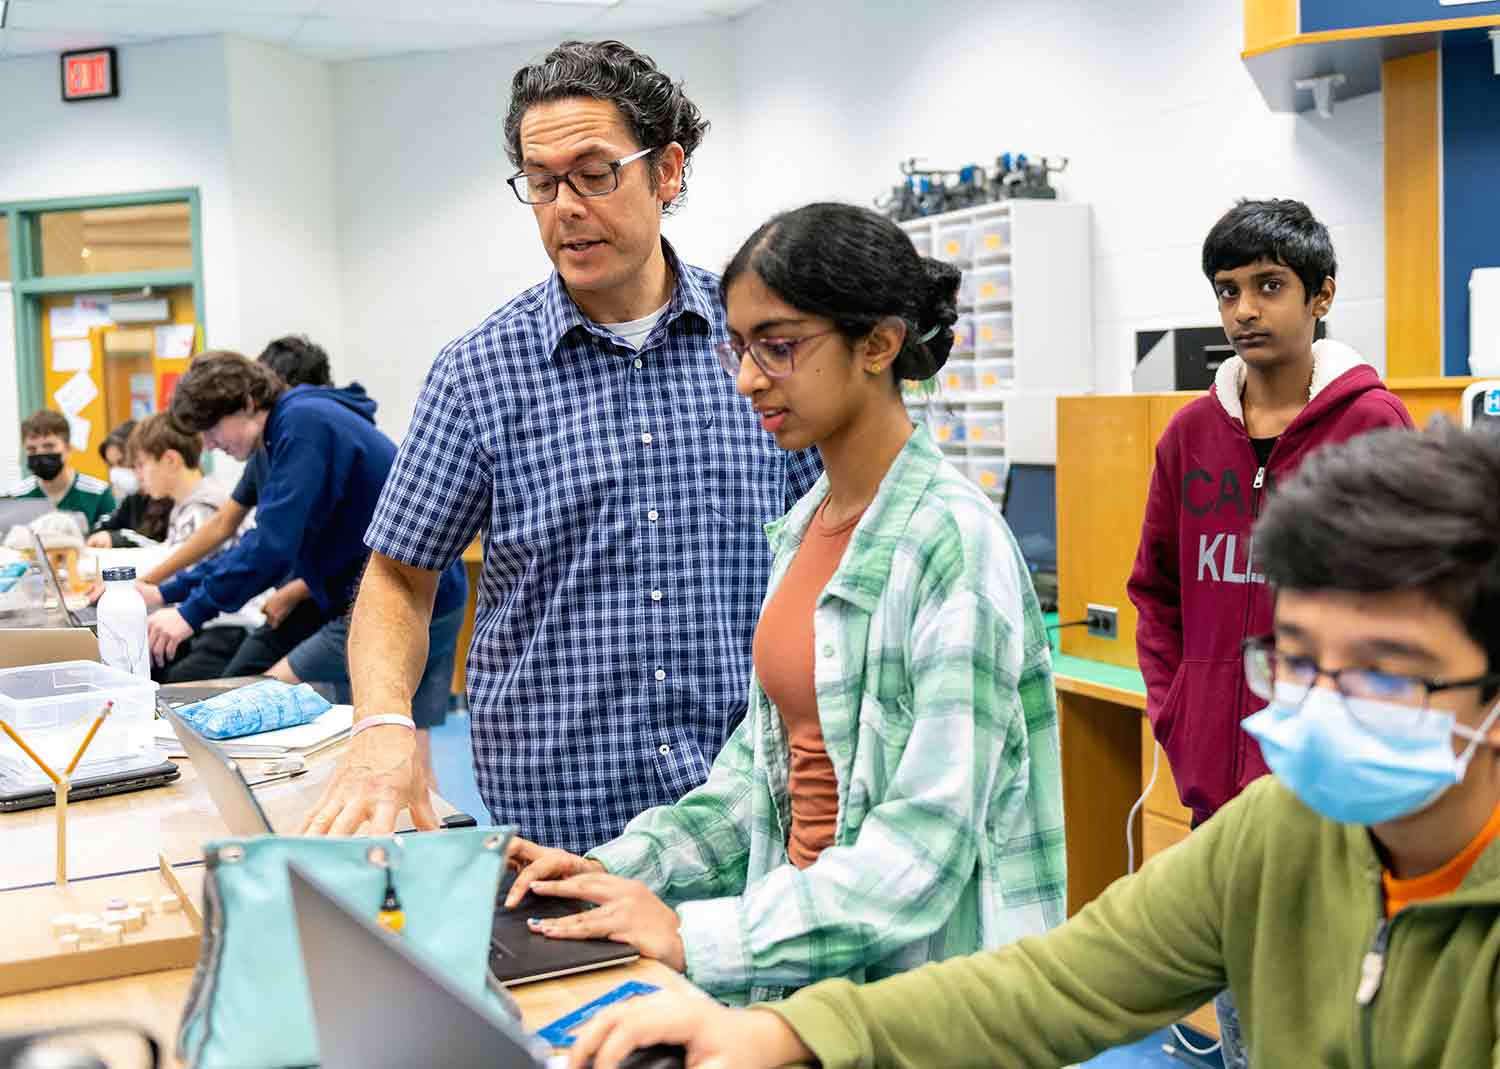 In a classroom, a teacher and student look at a computer as other students work at tables.